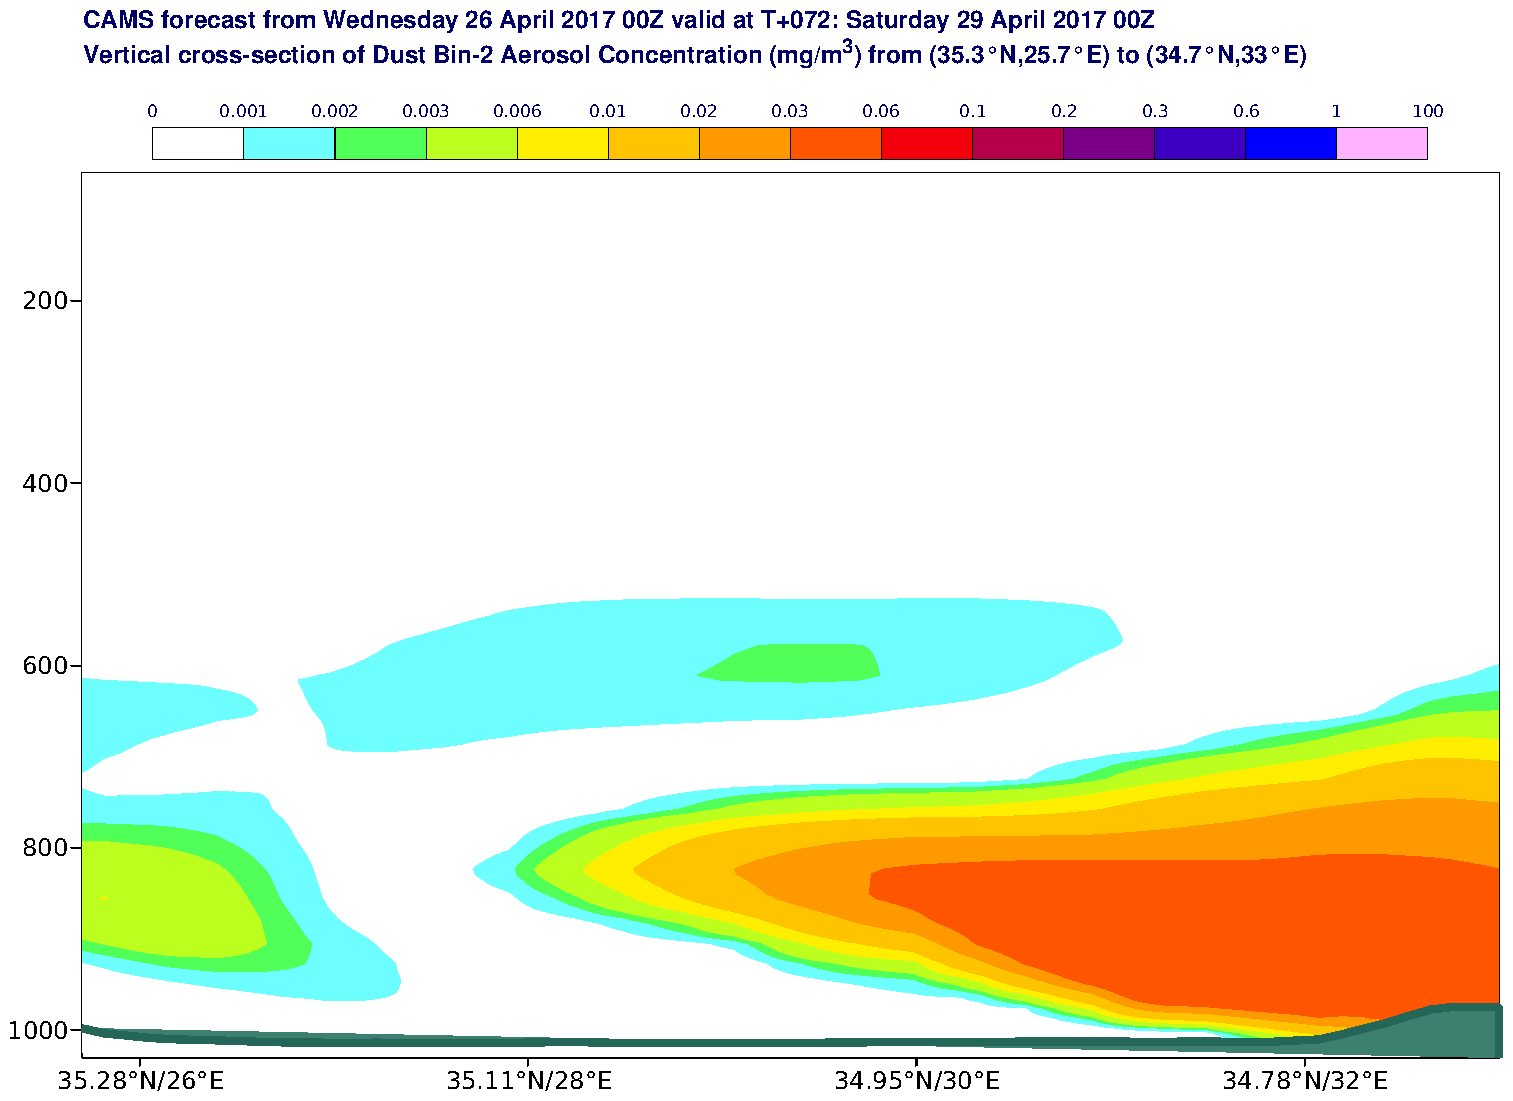 Vertical cross-section of Dust Bin-2 Aerosol Concentration (mg/m3) valid at T72 - 2017-04-29 00:00